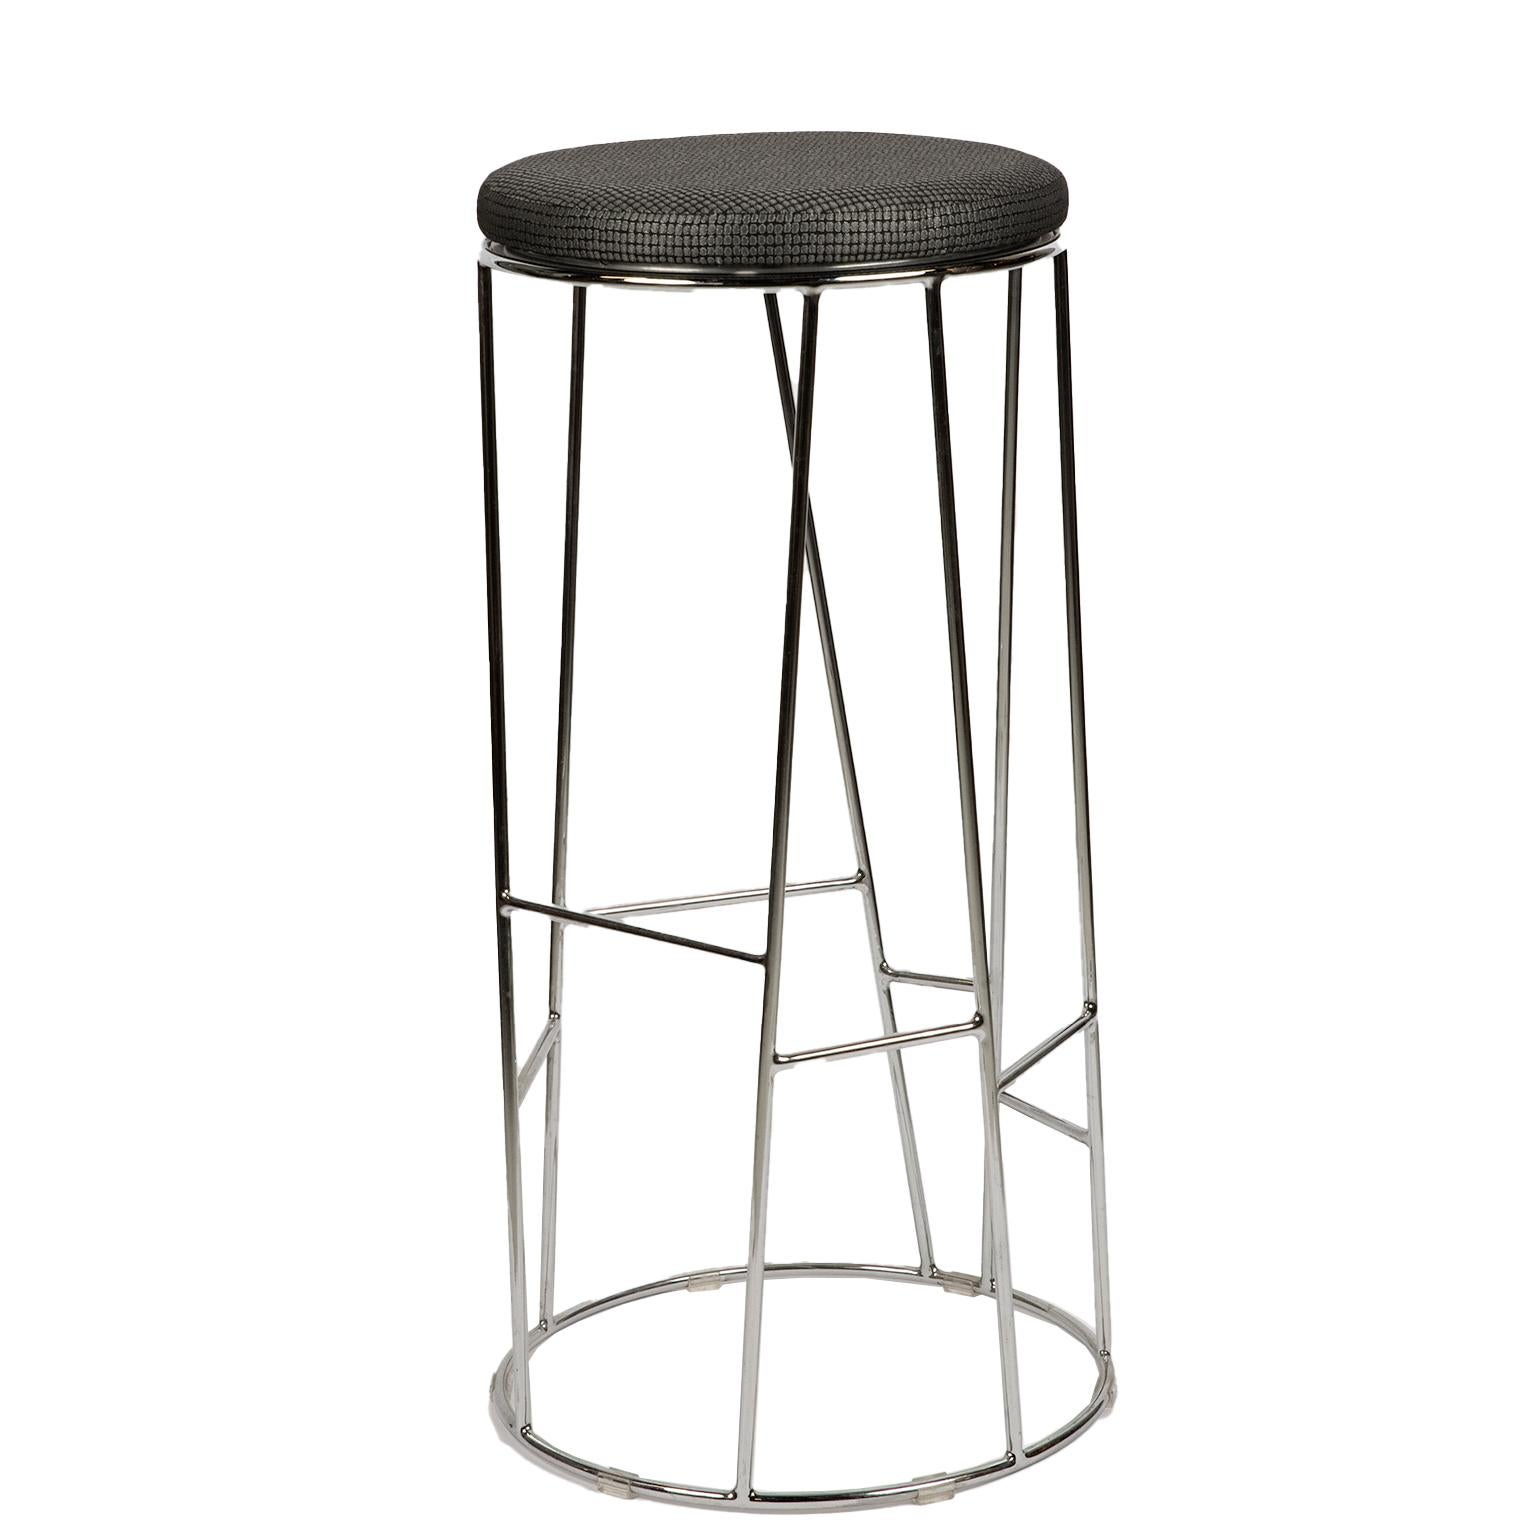 This set of eight  modern and sophisticated Forest  bar stools with chrome plated stainless steel frame and grey patterned upholstered swivel seat are made by Bernhardt Design. The client never used them so they are practically new! Sold